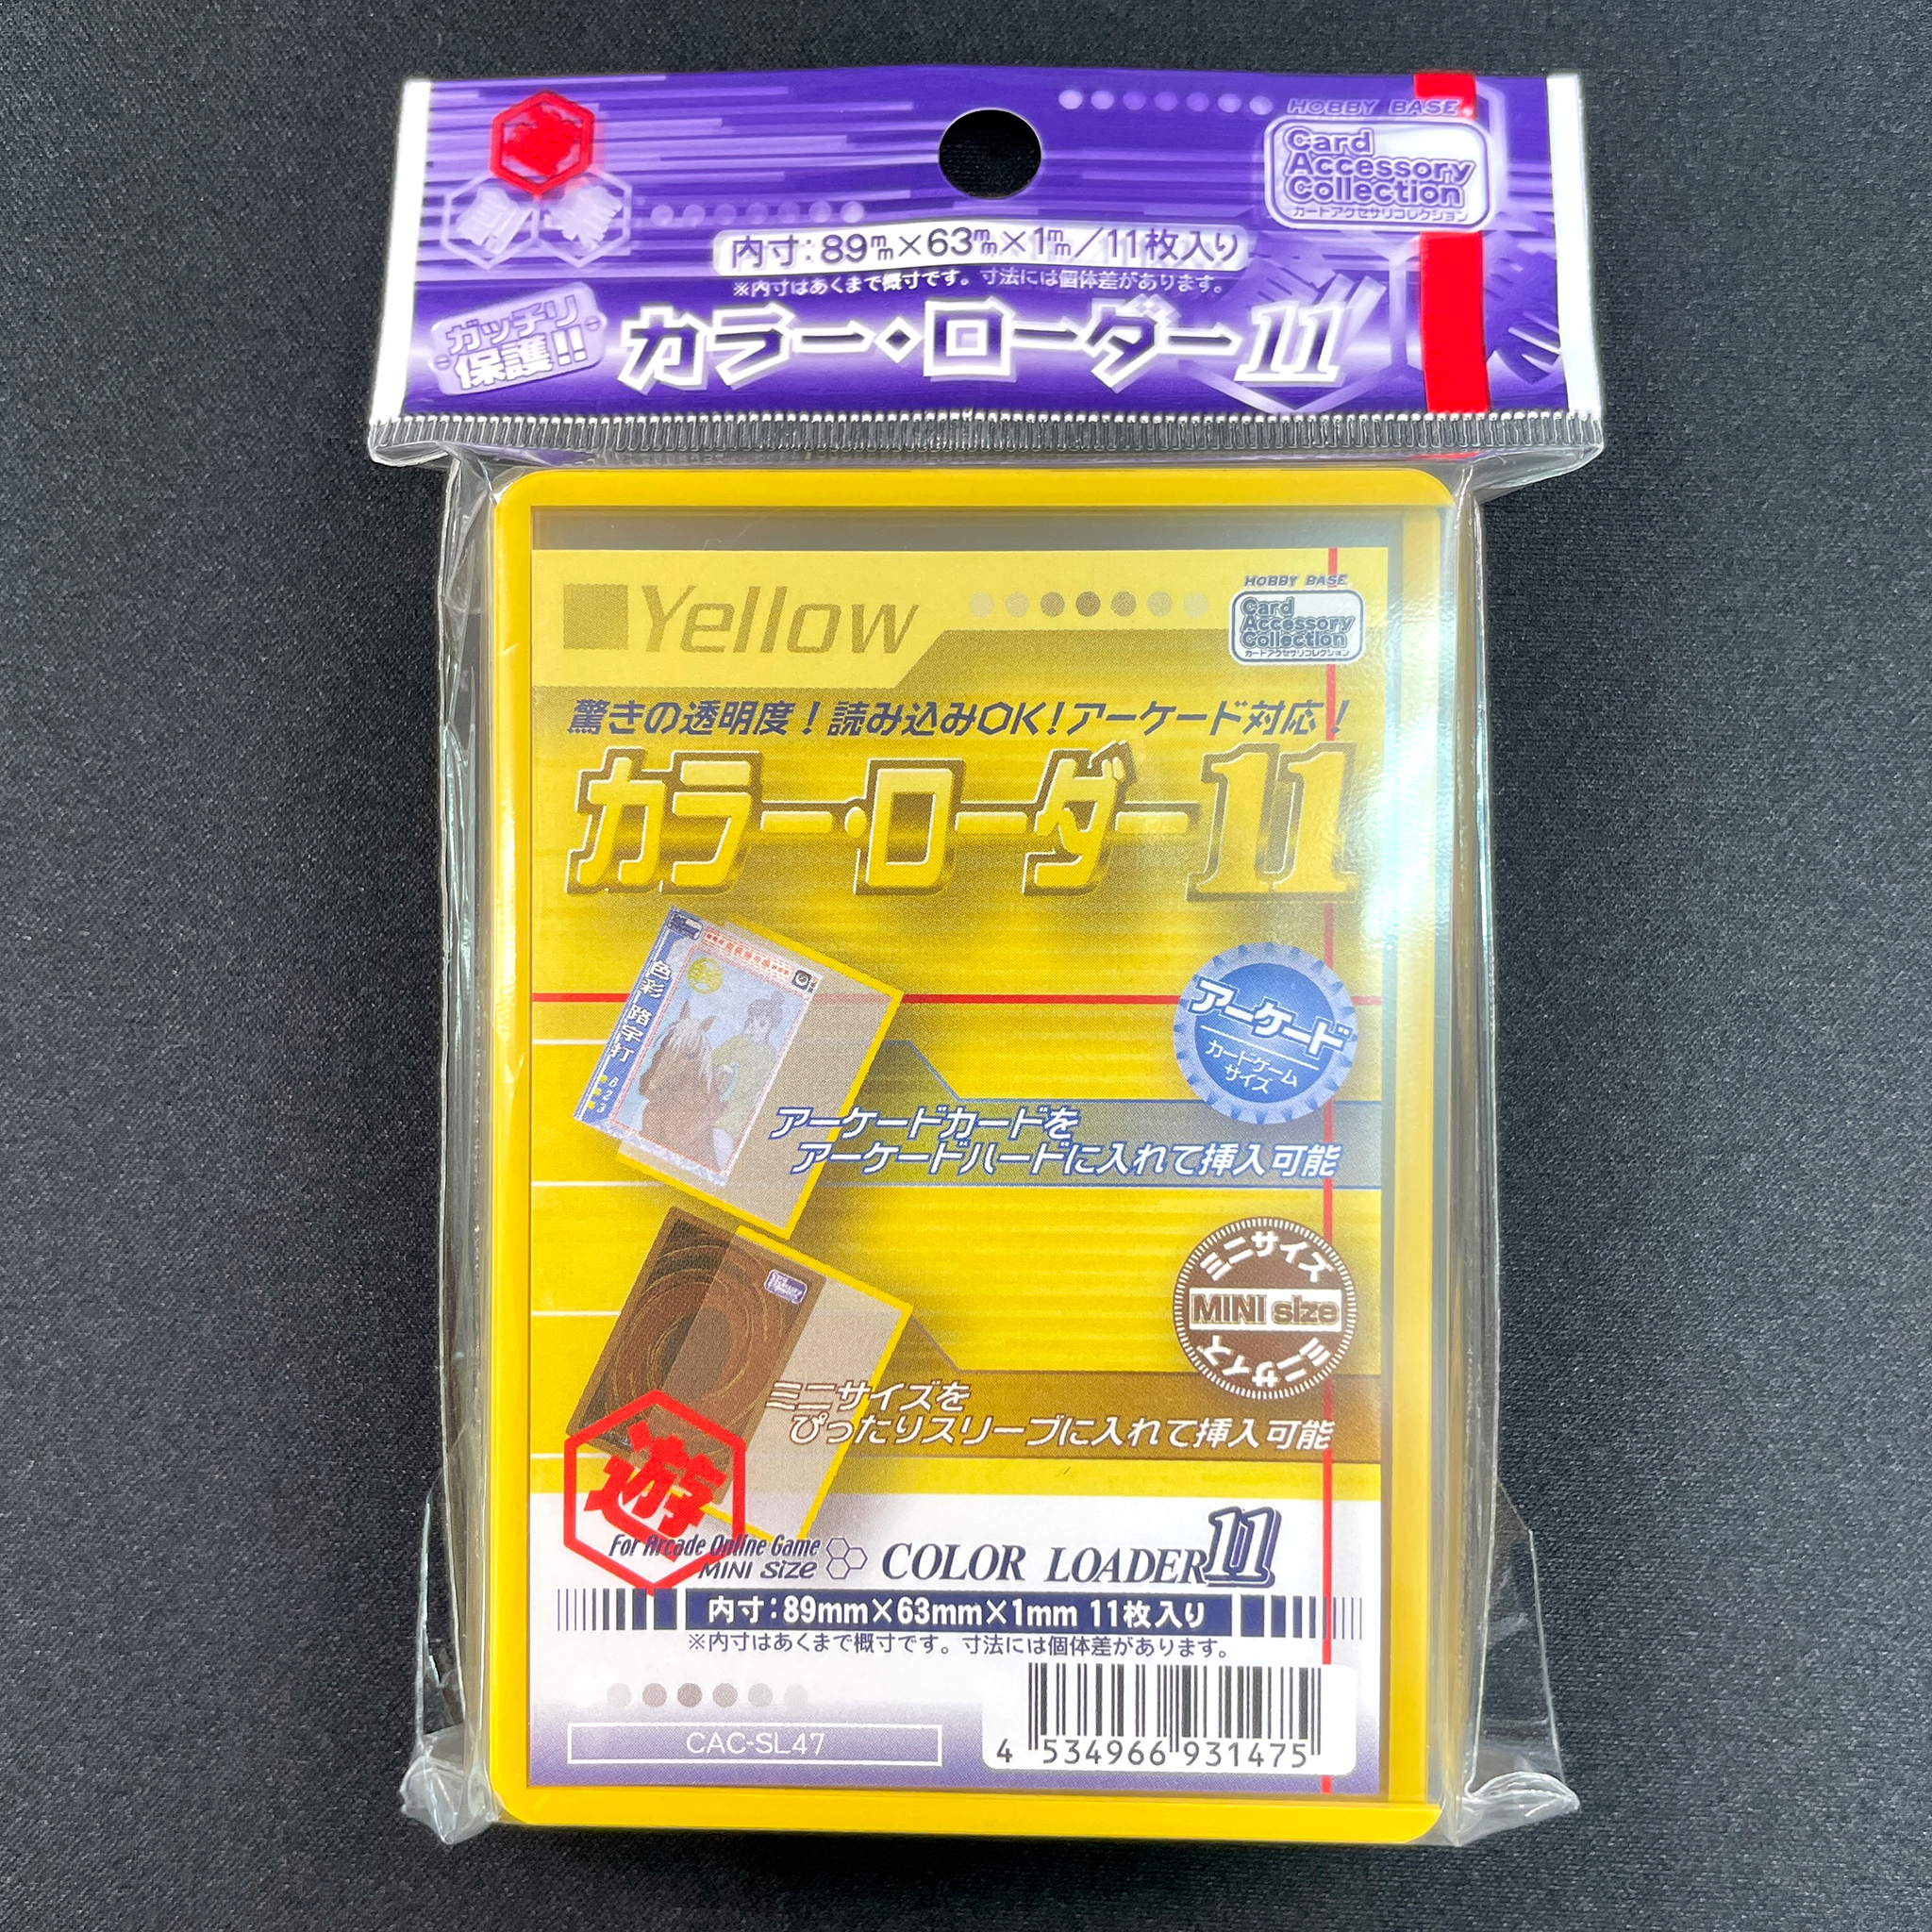 HOBBY BASE Color Loader 11 Yellow  For arcade size (58 x 81mm) or small size (59 x 86mm) / 11 loaders.  Inside size: 89mm× 63mm × 1mm